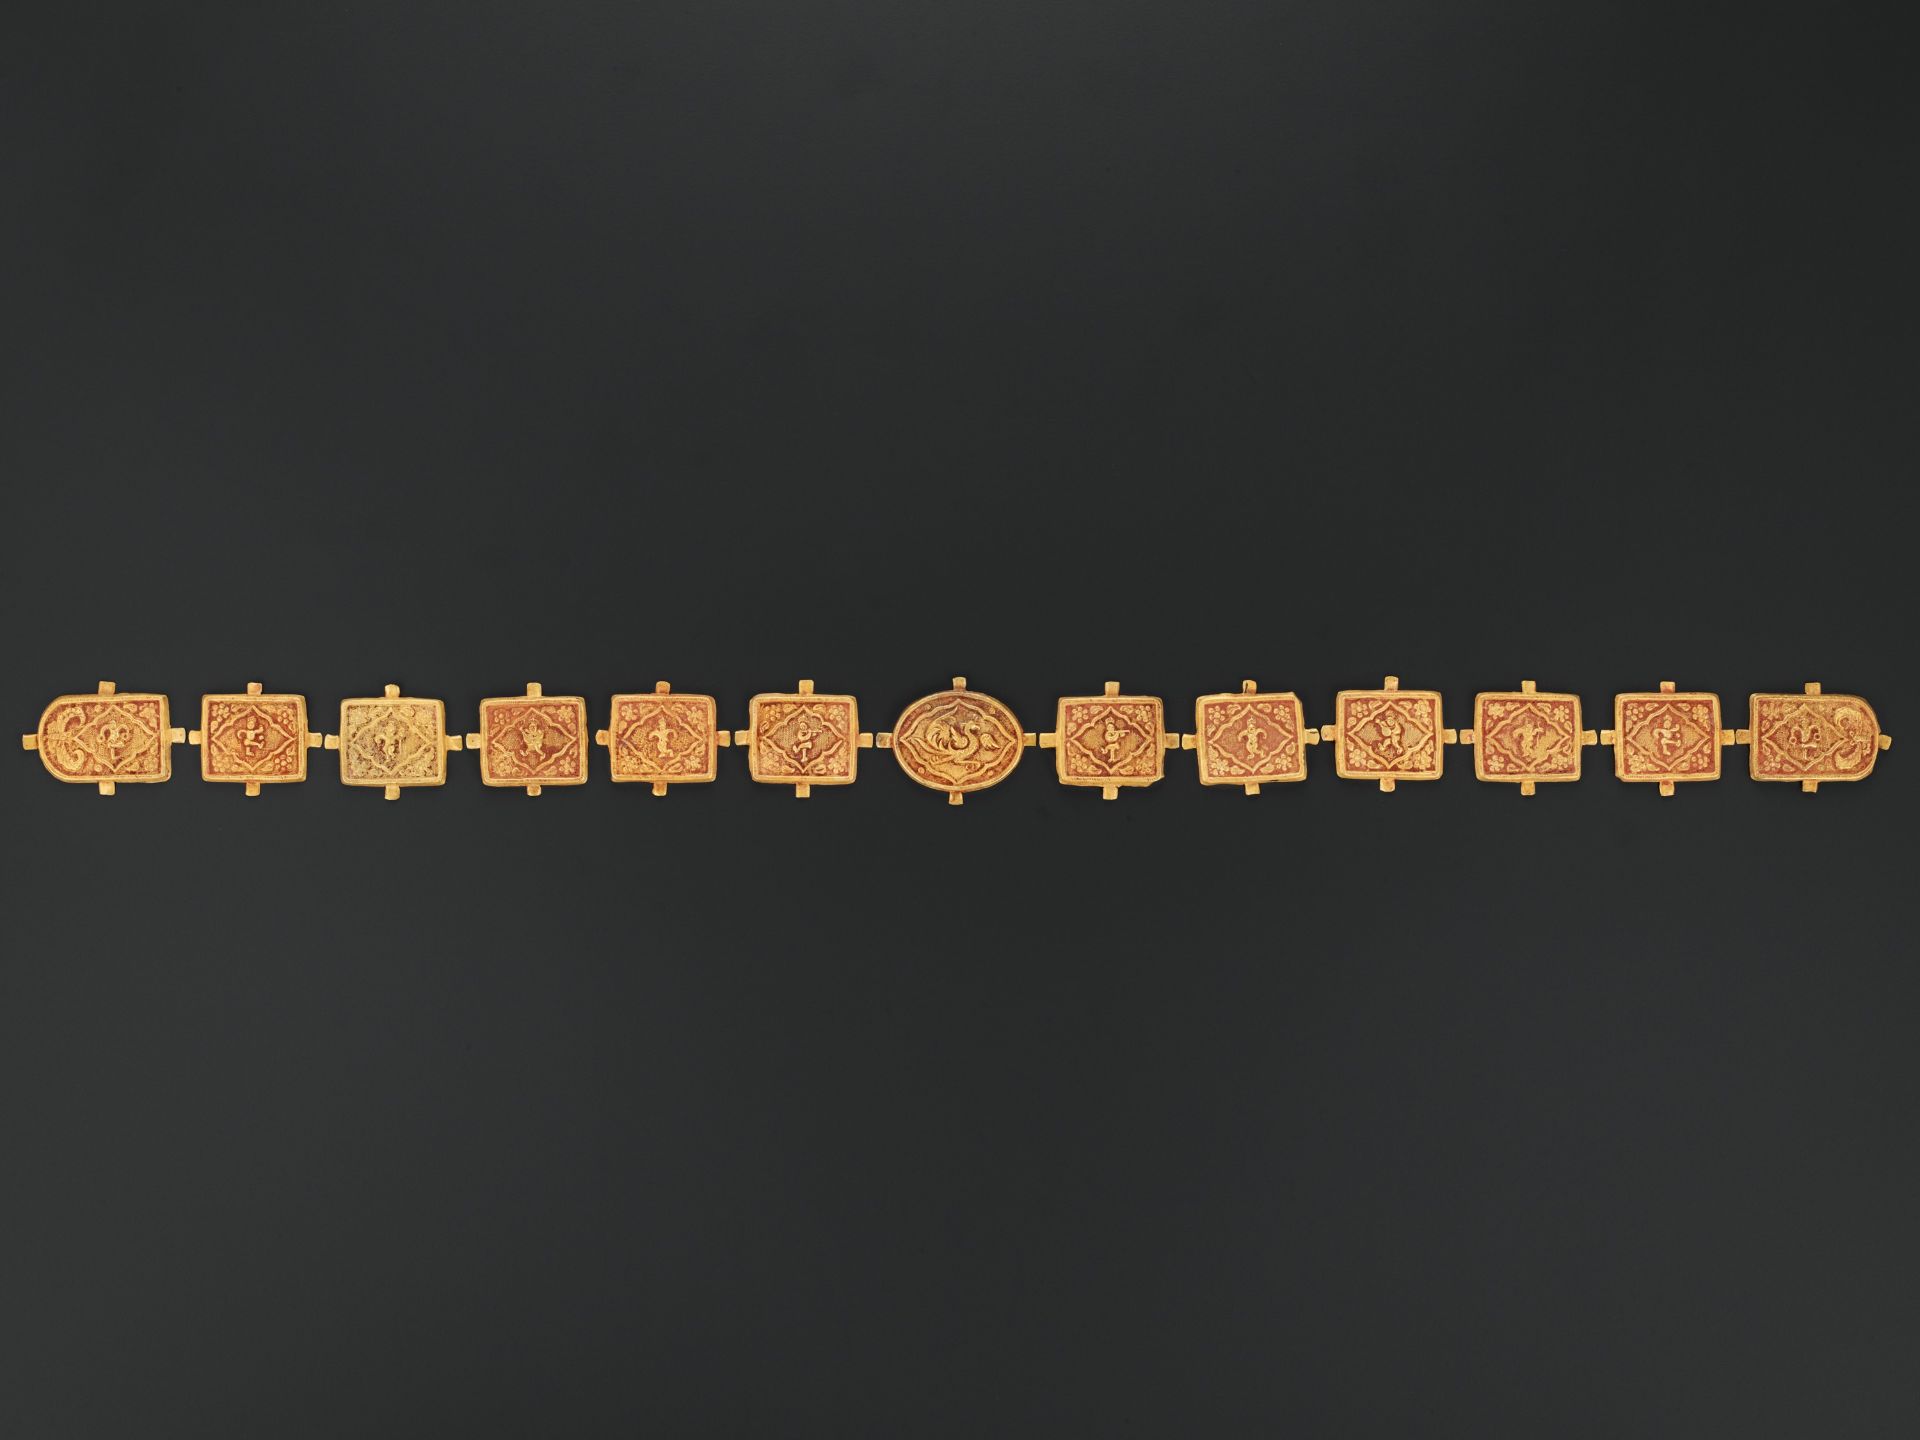 A 13-PART GOLD REPOUSSE BELT, TANG TO LIAO DYNASTY